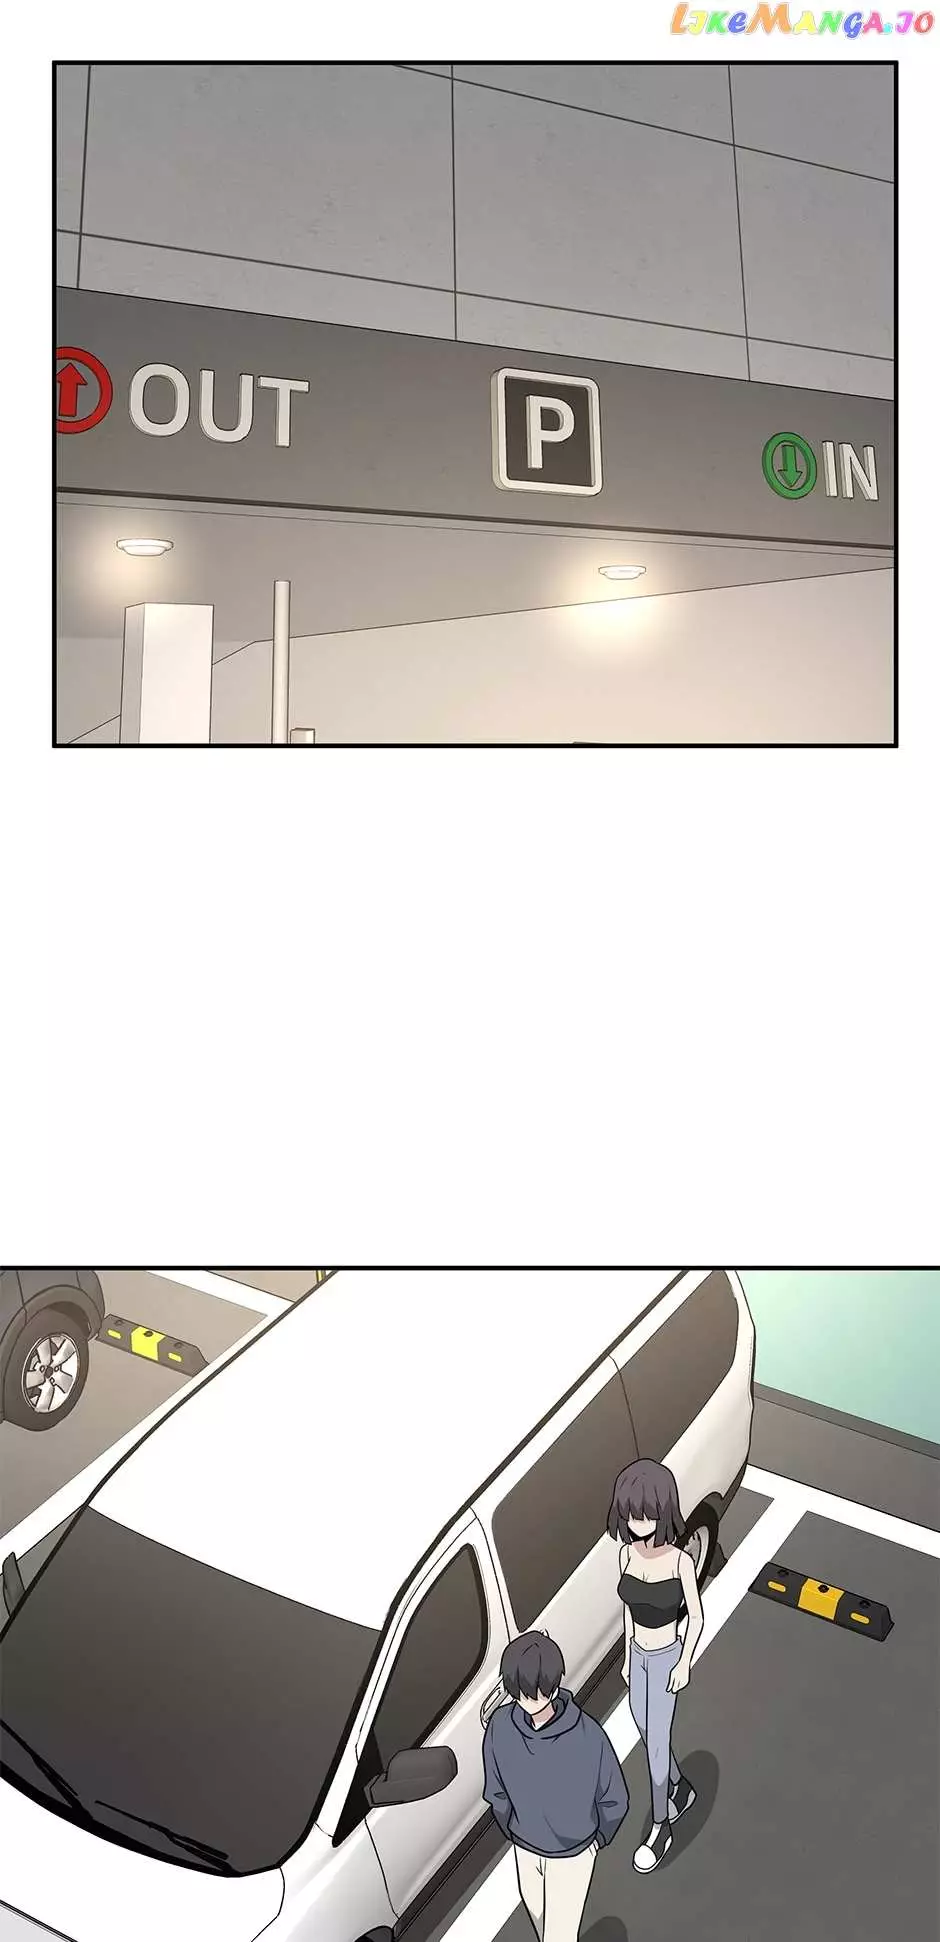 Where Are You Looking, Manager? - 103 page 5-e44fdfd8